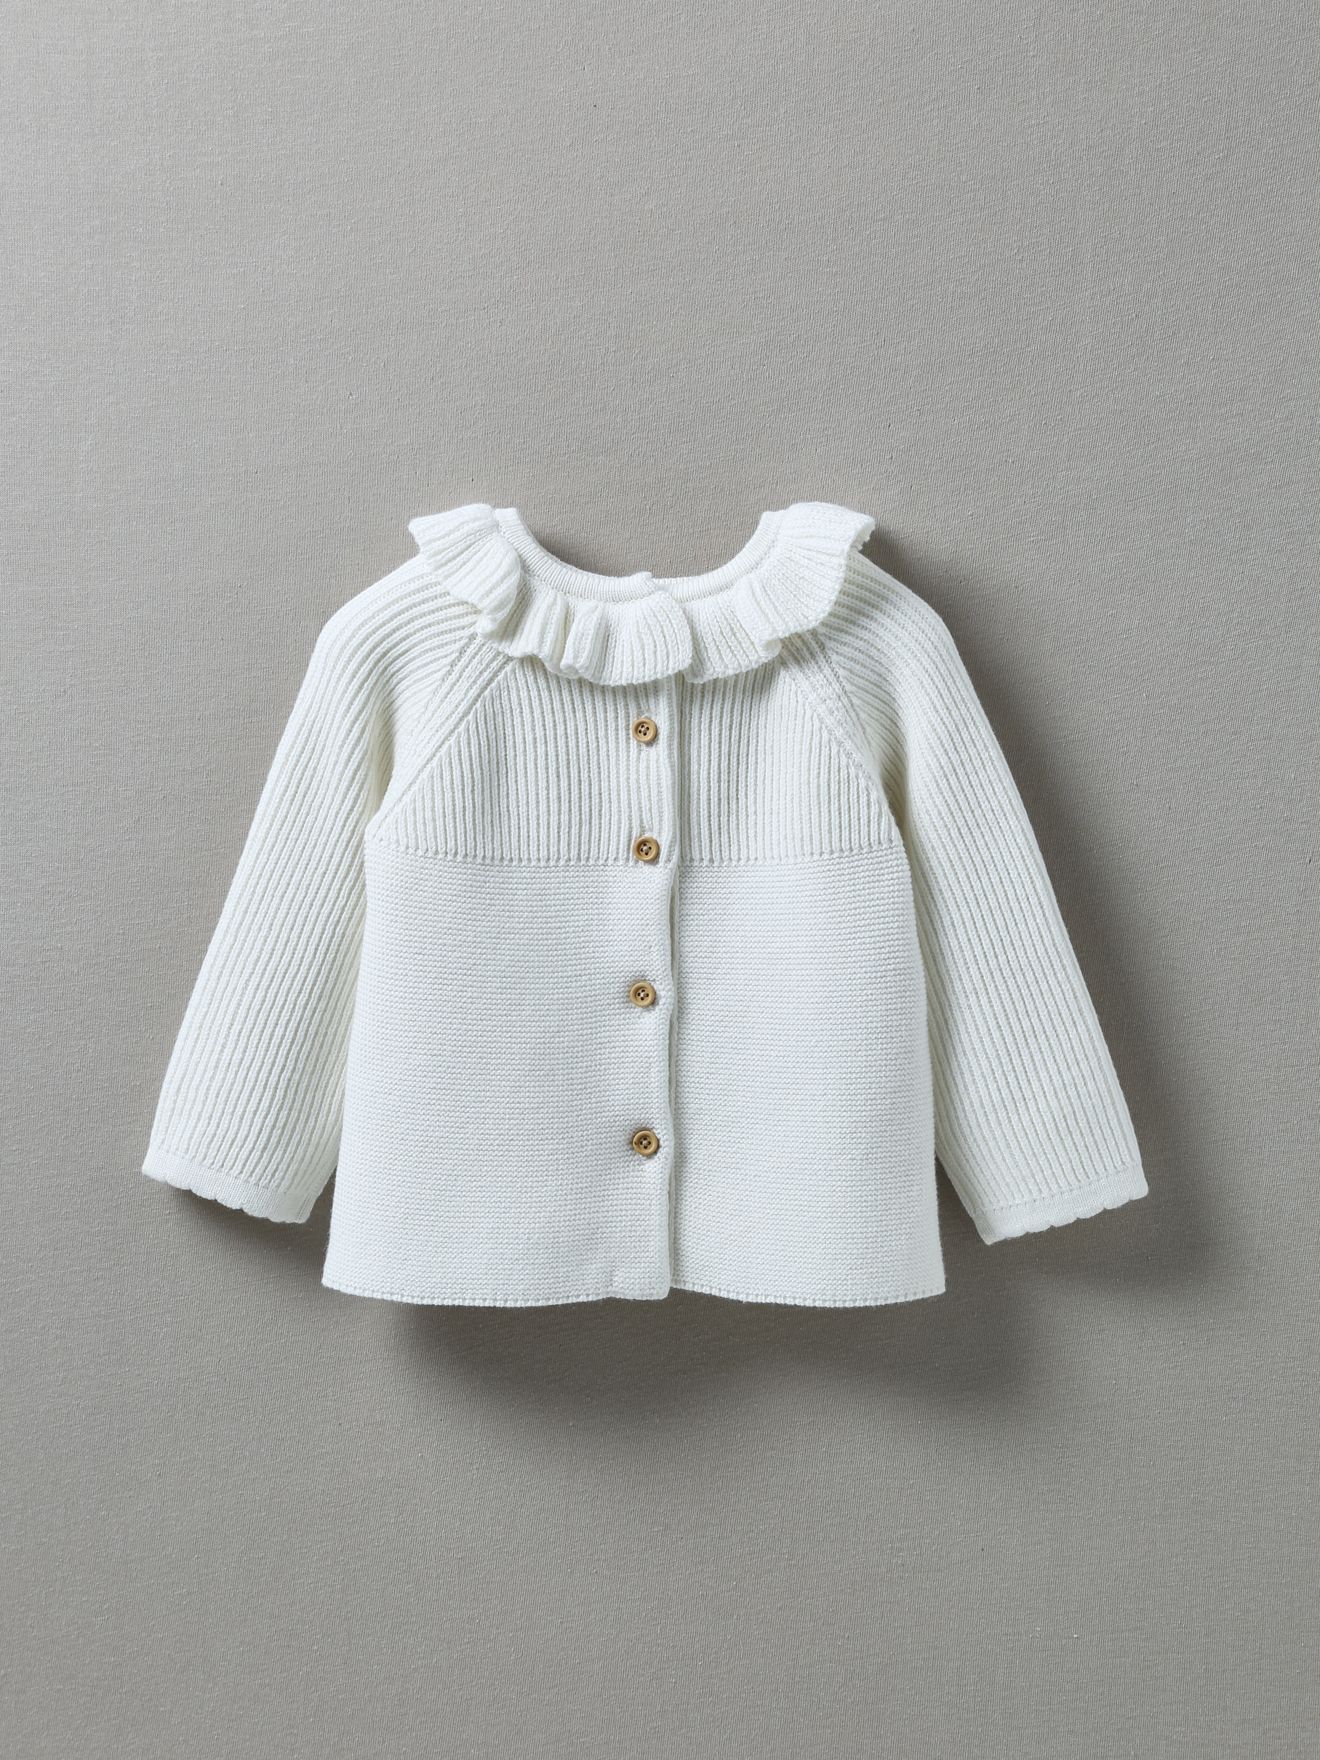 Baby Girl Clothing Child - page 8 | Place des Tendances